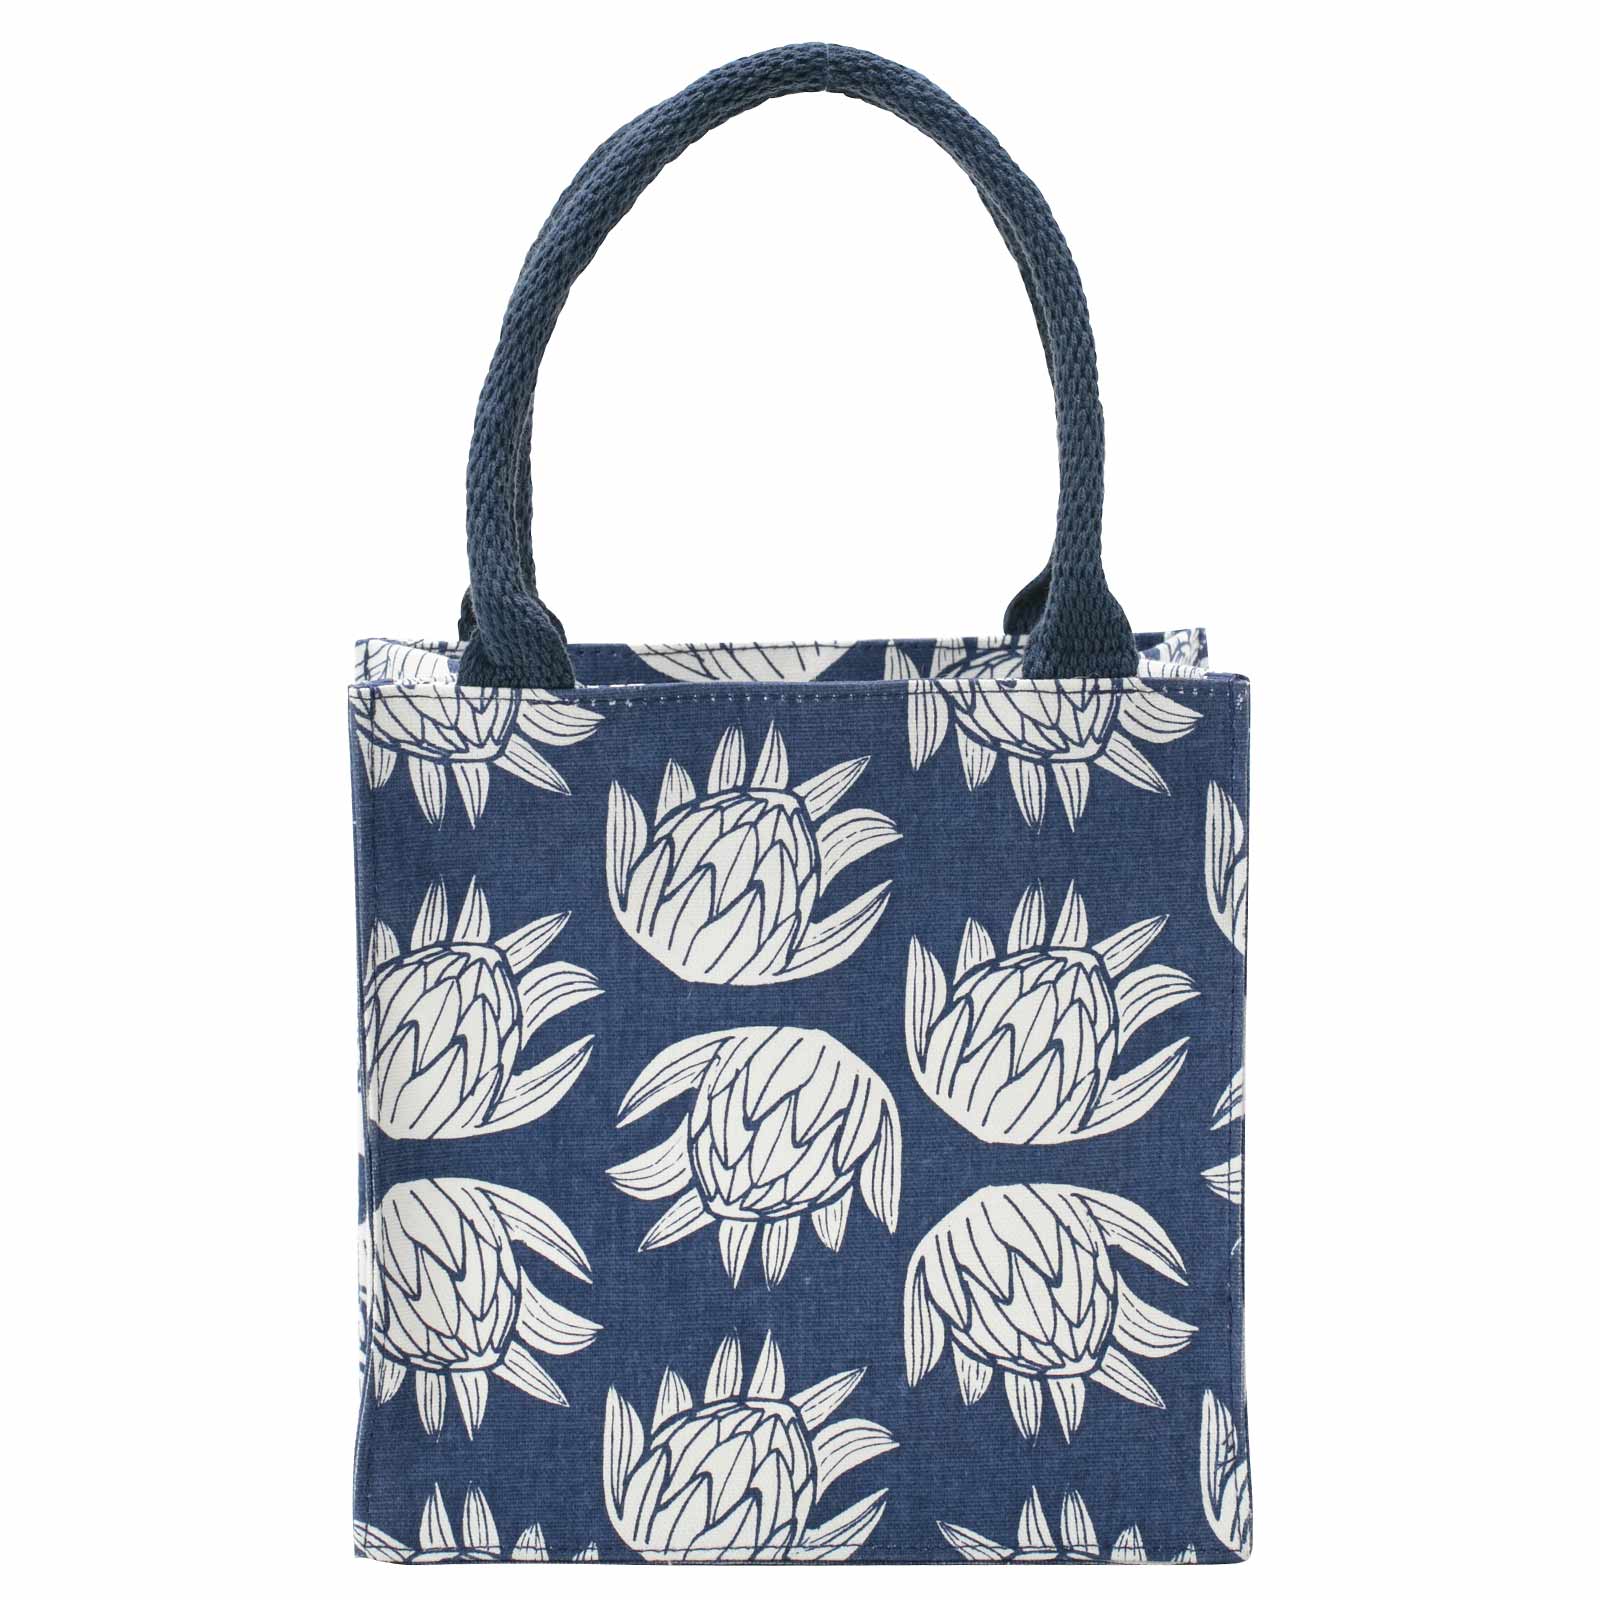 PROTEA 'Itsy Bitsy' Reusable Gift Bag